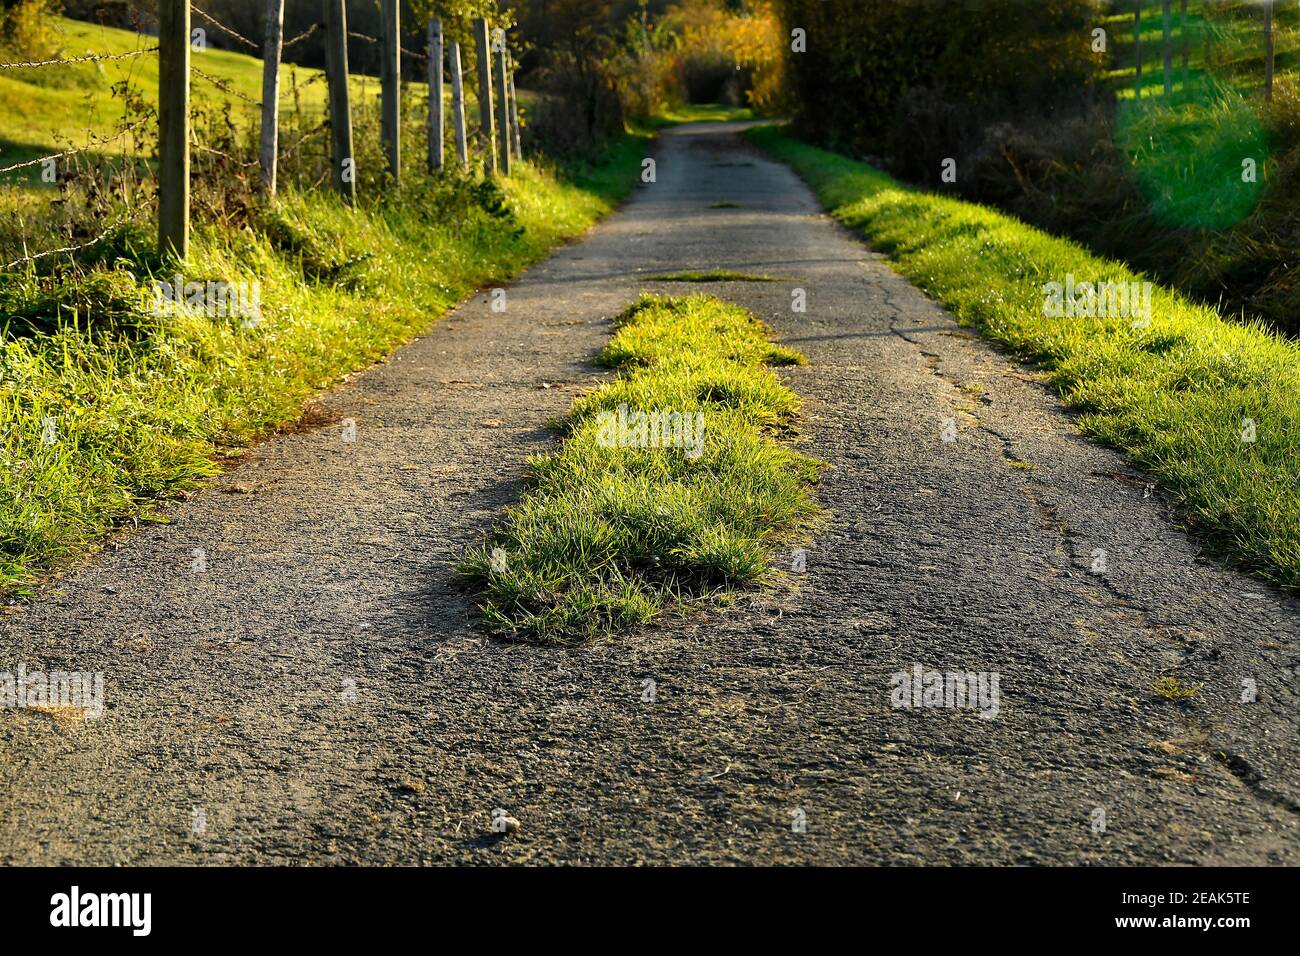 old way overgrown with grass Stock Photo